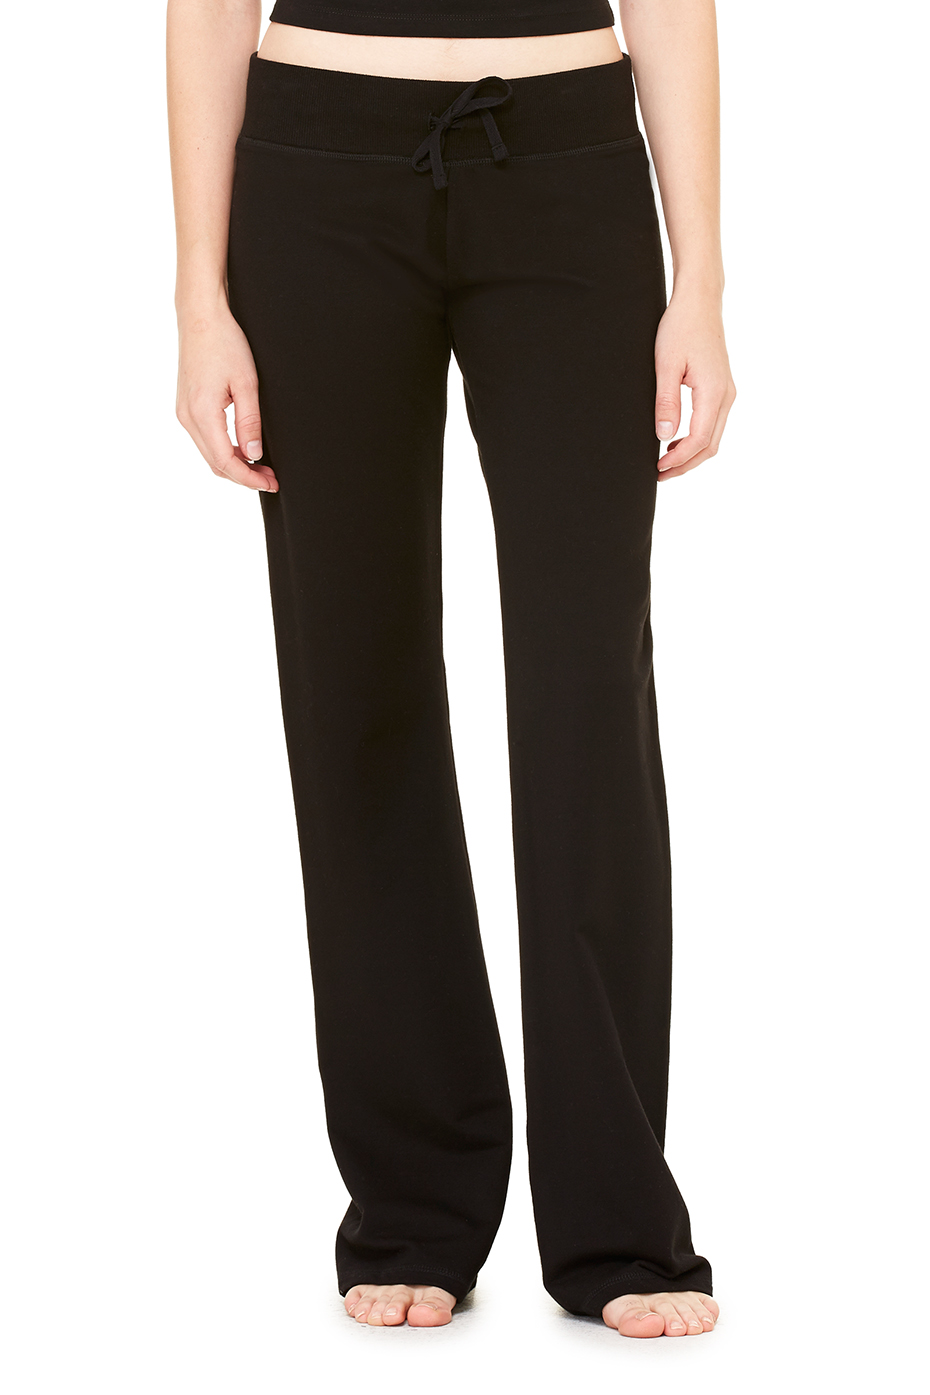 Women's Stretch French Terry Lounge Pant | Bella-Canvas